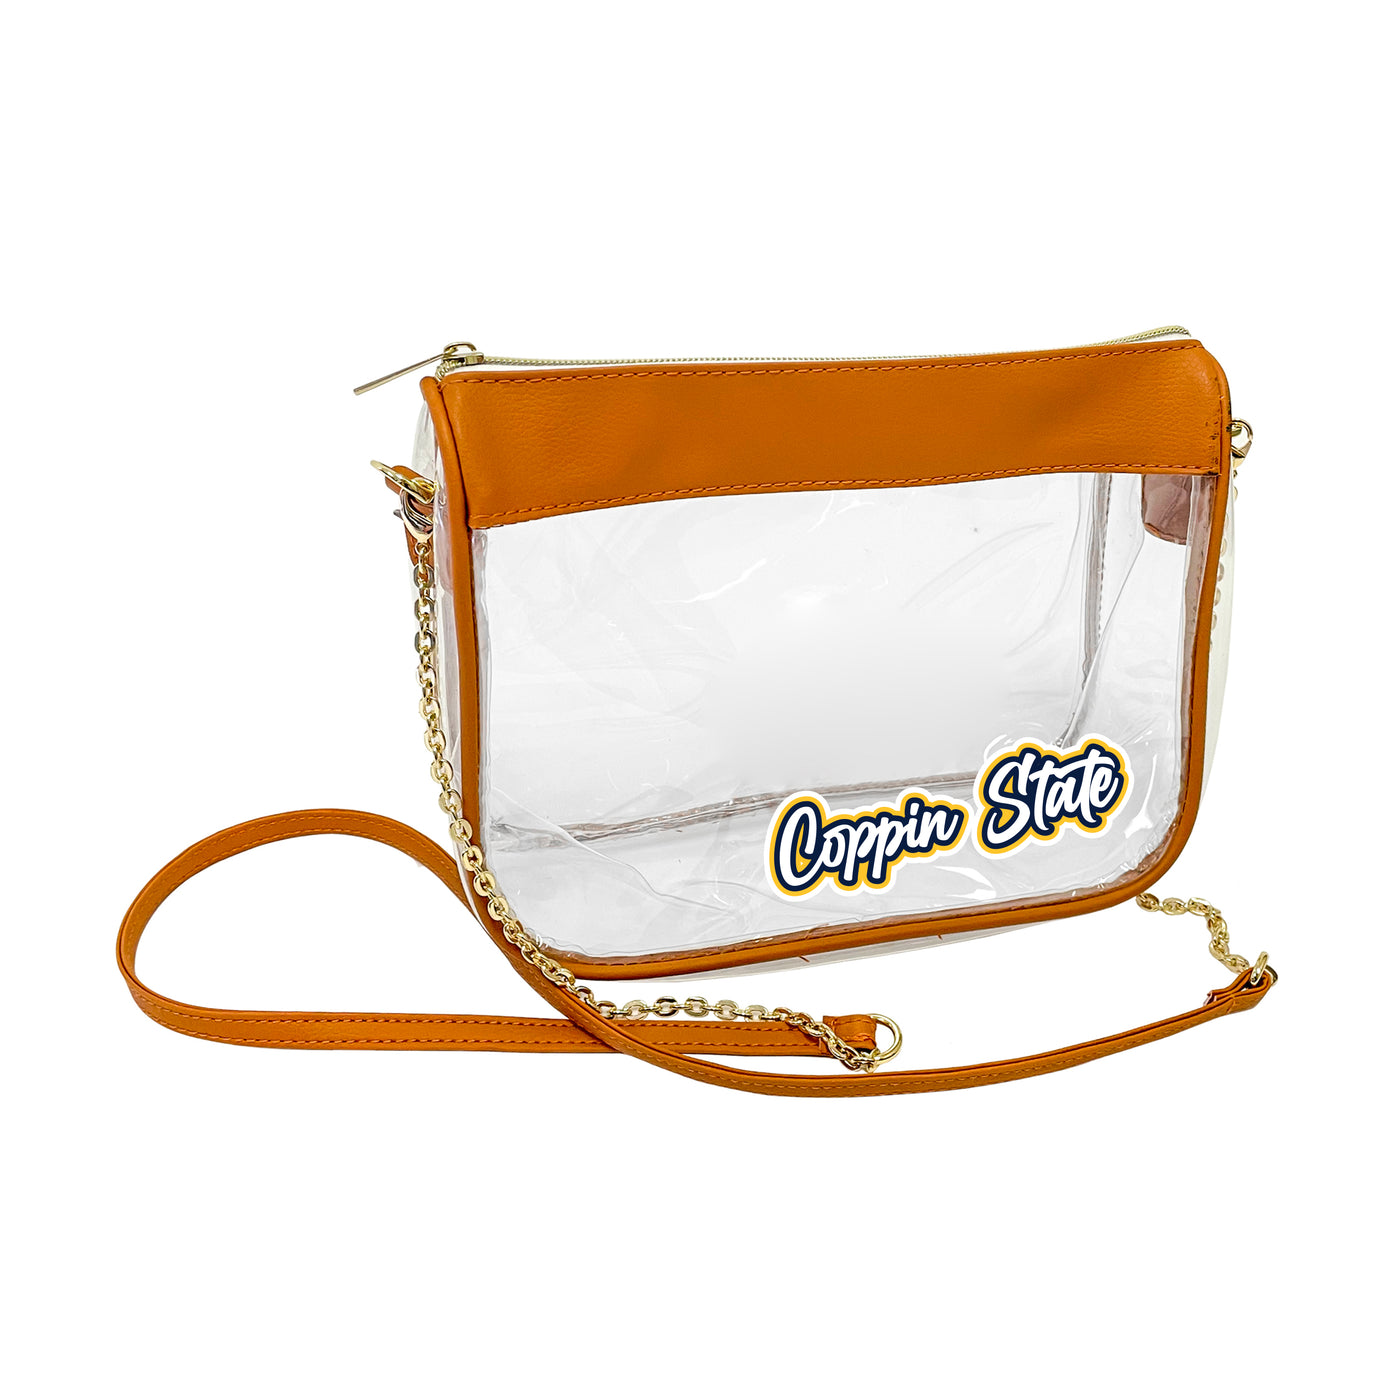 Coppin State Hype Clear Bag